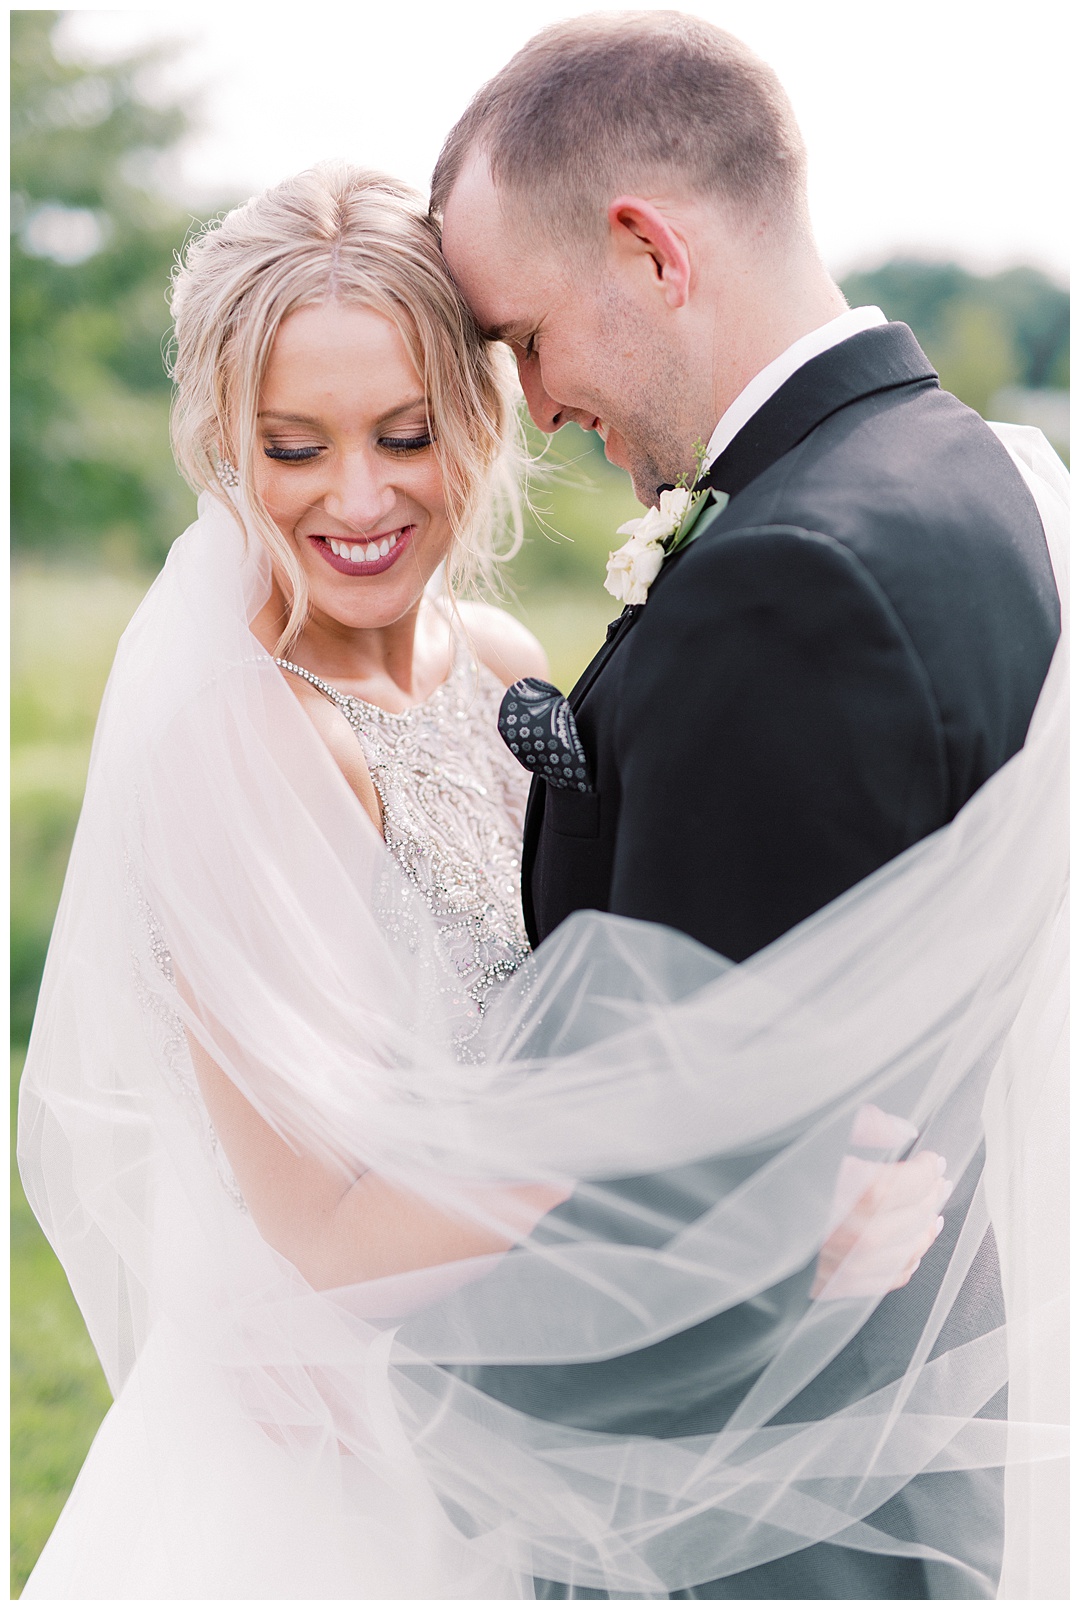 Bride and Groom Lush Backyard Wedding on Film Featured on Magnolia Rouge with Sarah Sunstrom Photography